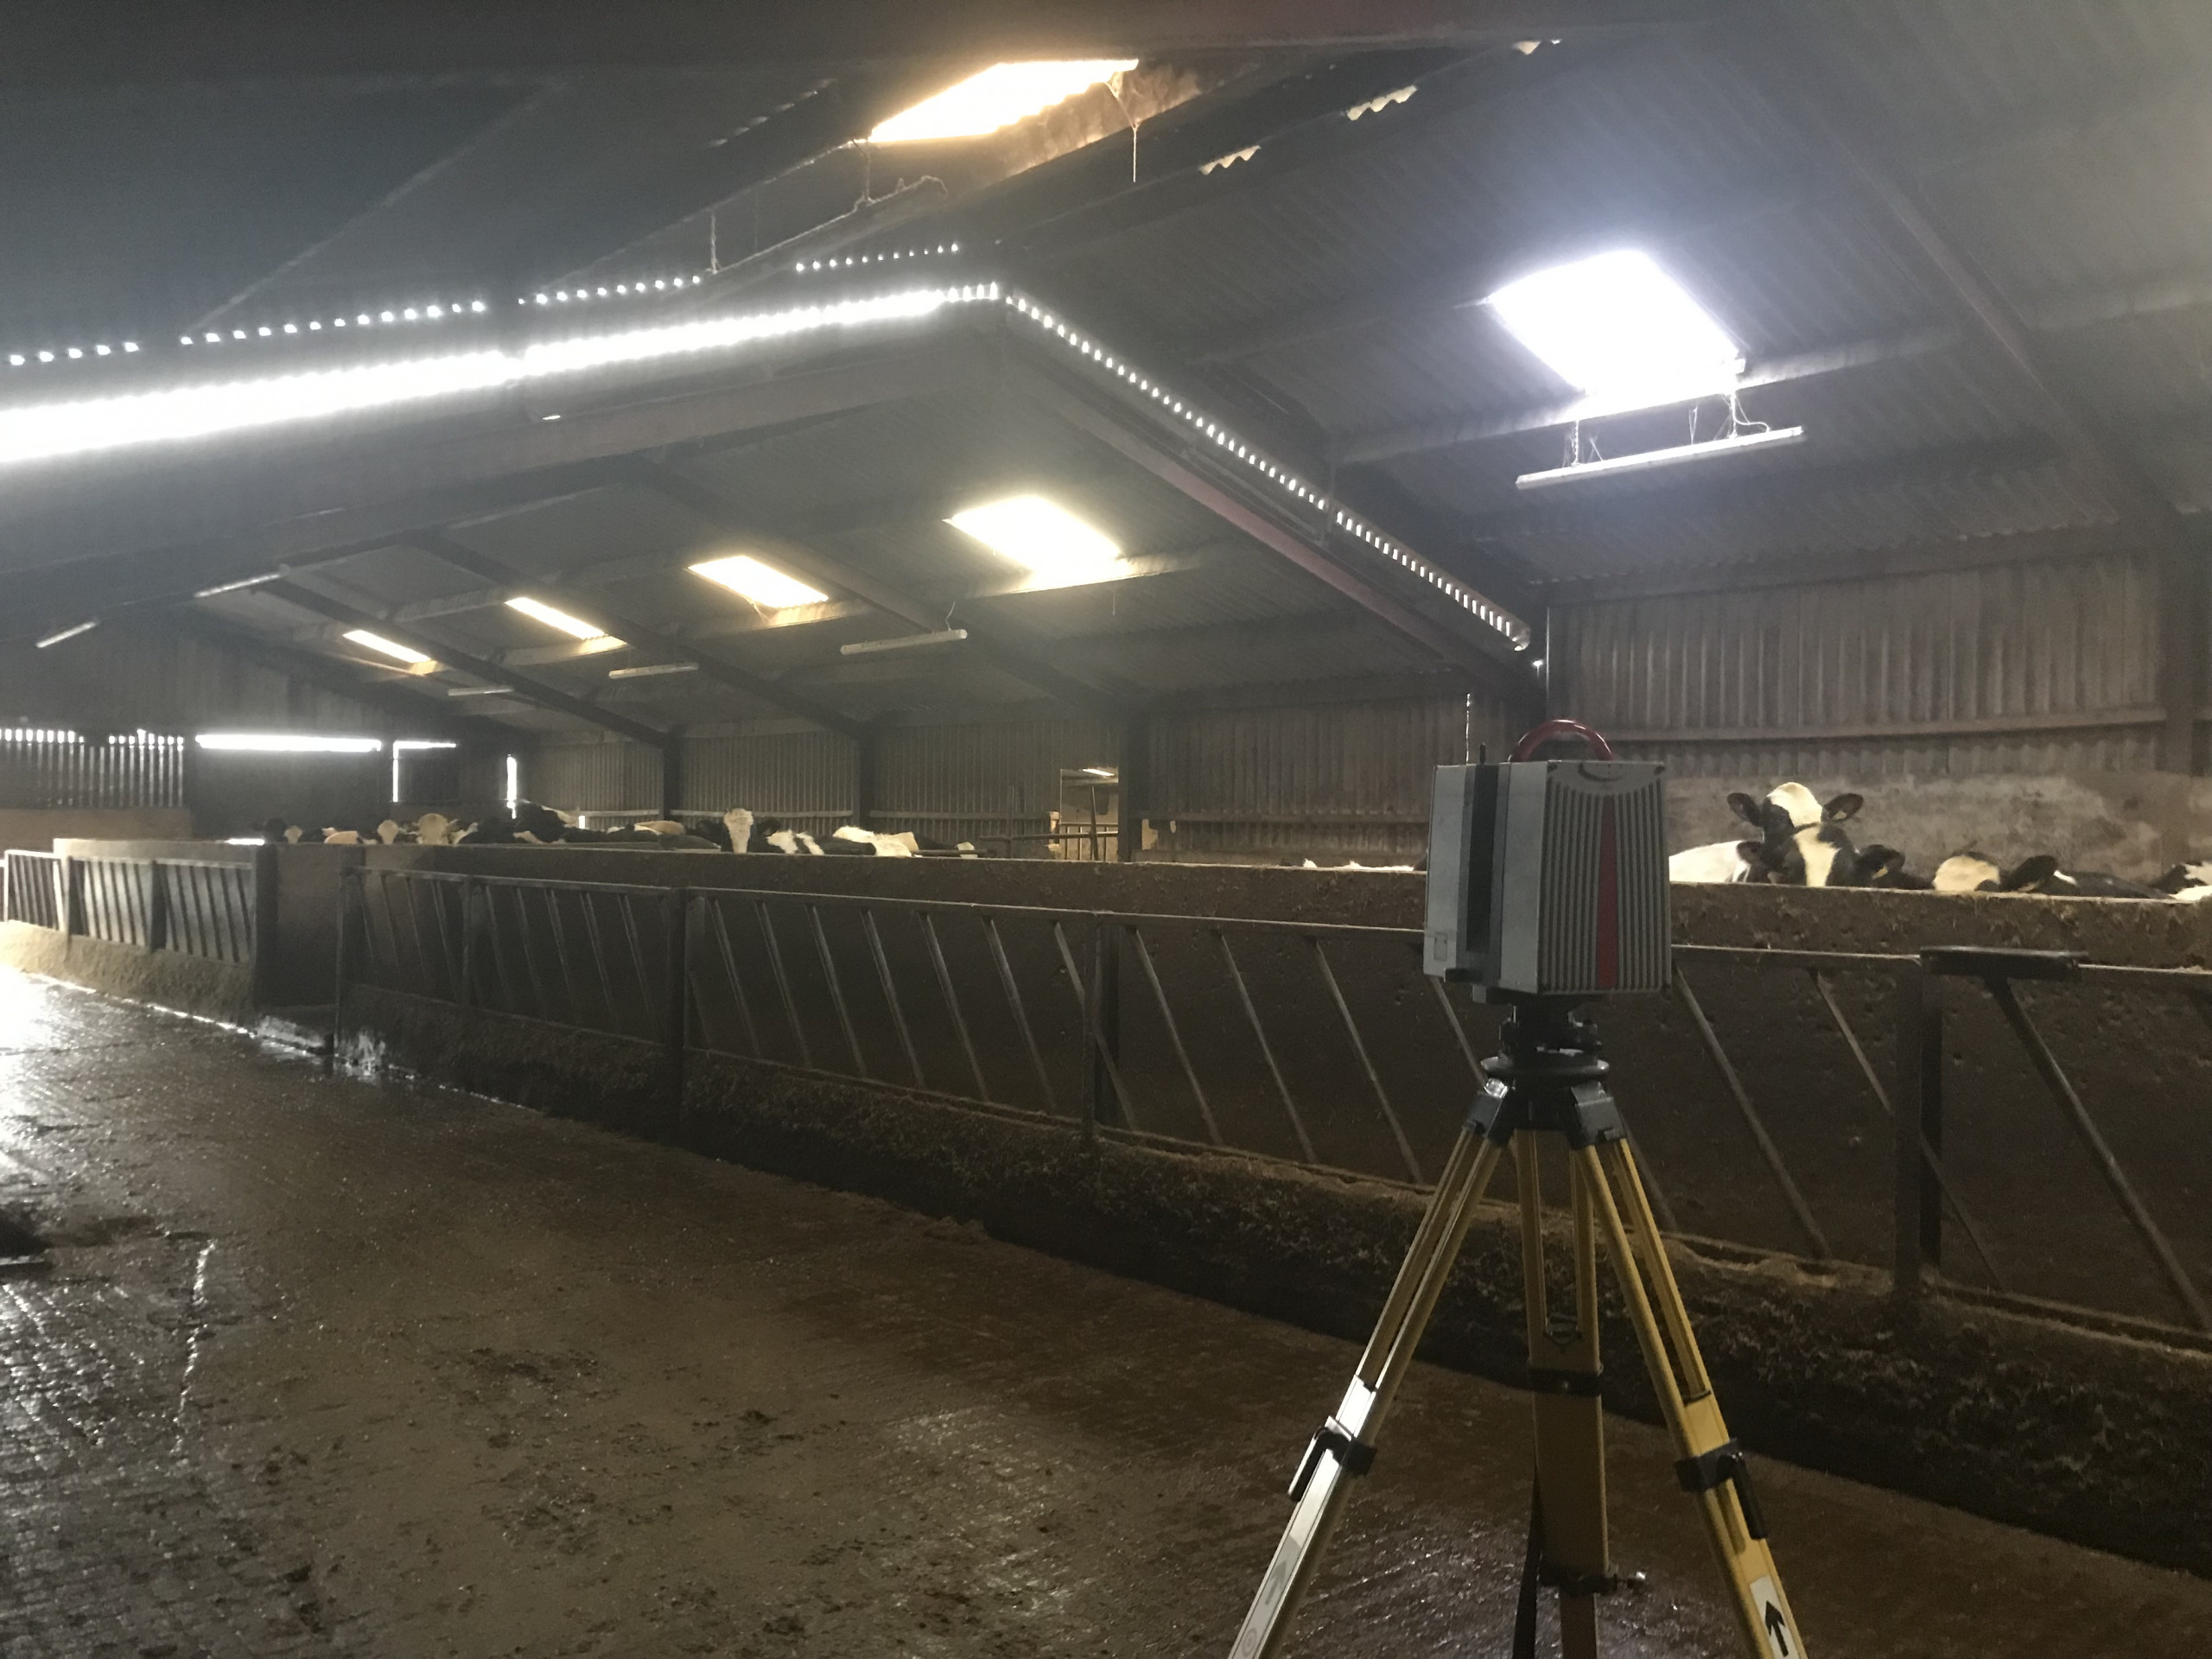 3D scanner on a yellow tripod inside a cow shed. The cows are separated by a concrete wall but are looking over to see what is happening.